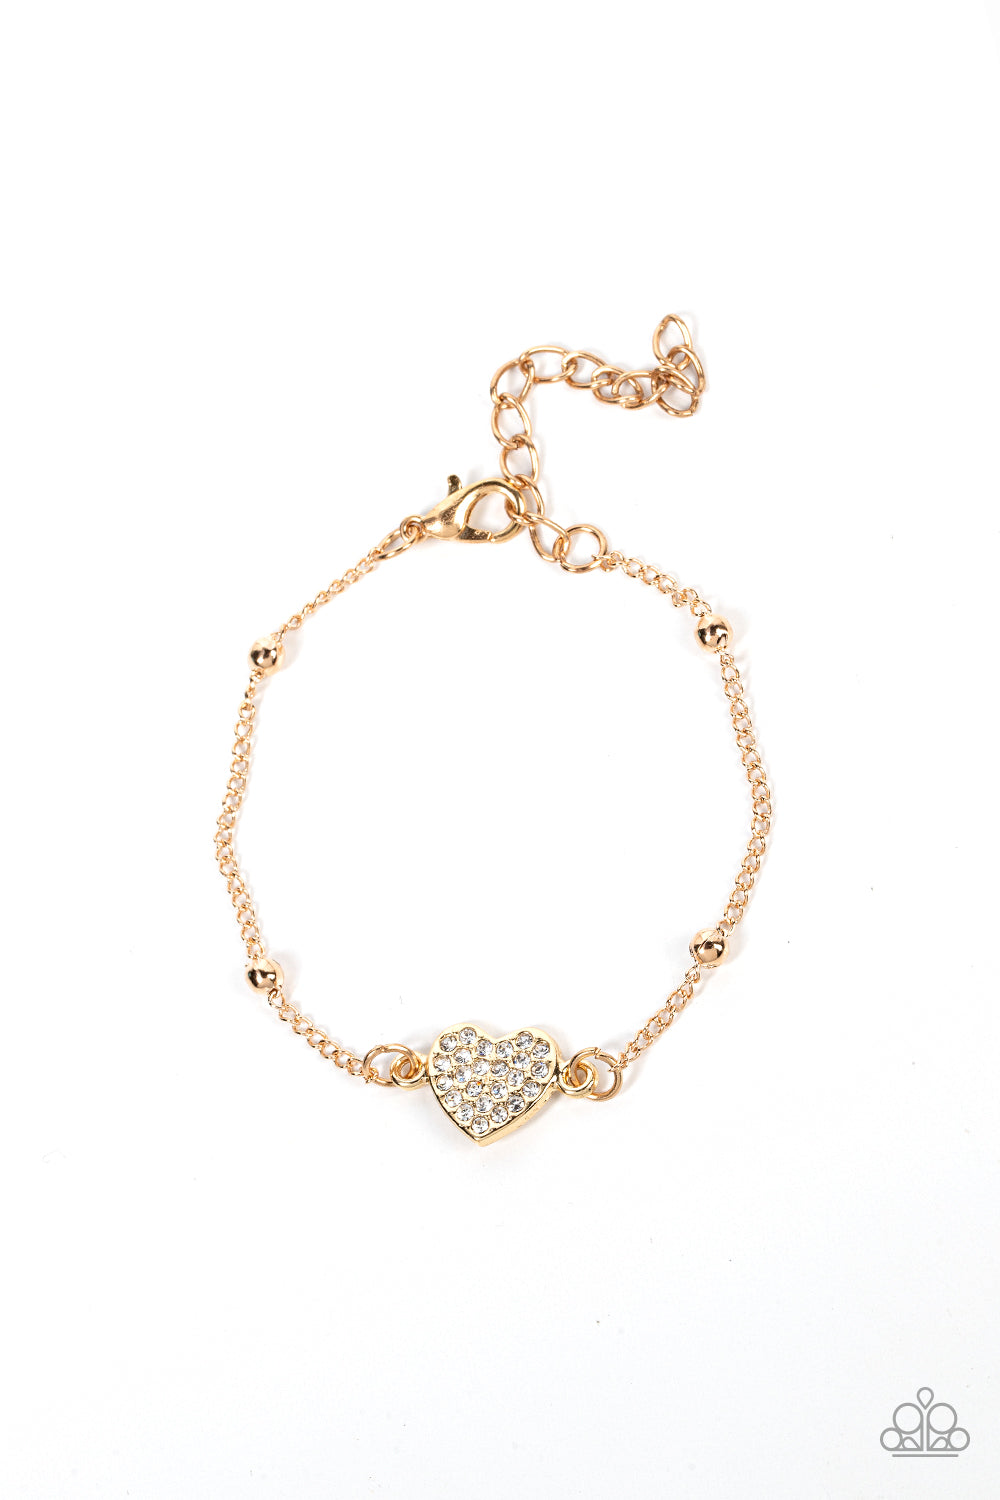 A white rhinestone dotted gold heart charm adorns a gold beaded chain, creating a romantic centerpiece. Features an adjustable clasp closure.